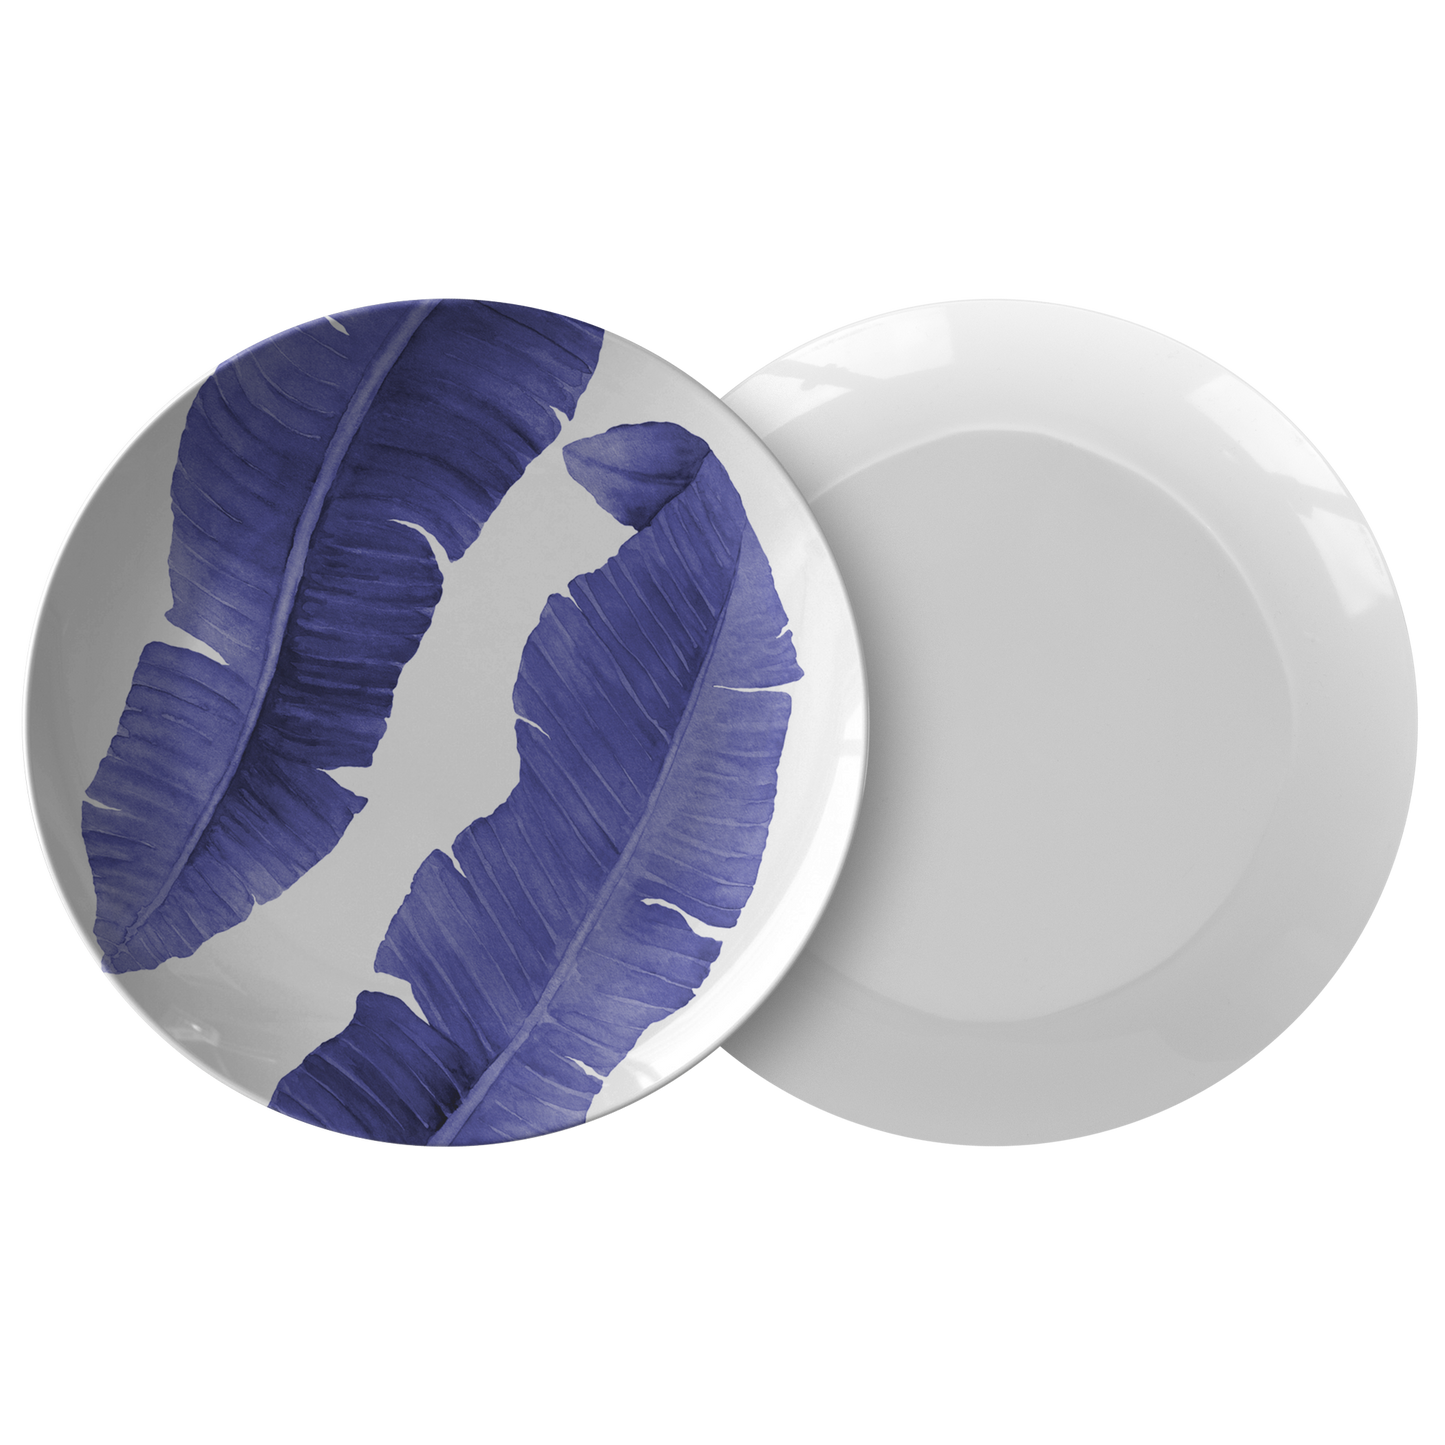 Tropical banana leaves print plastic dinner plates in blue and white.